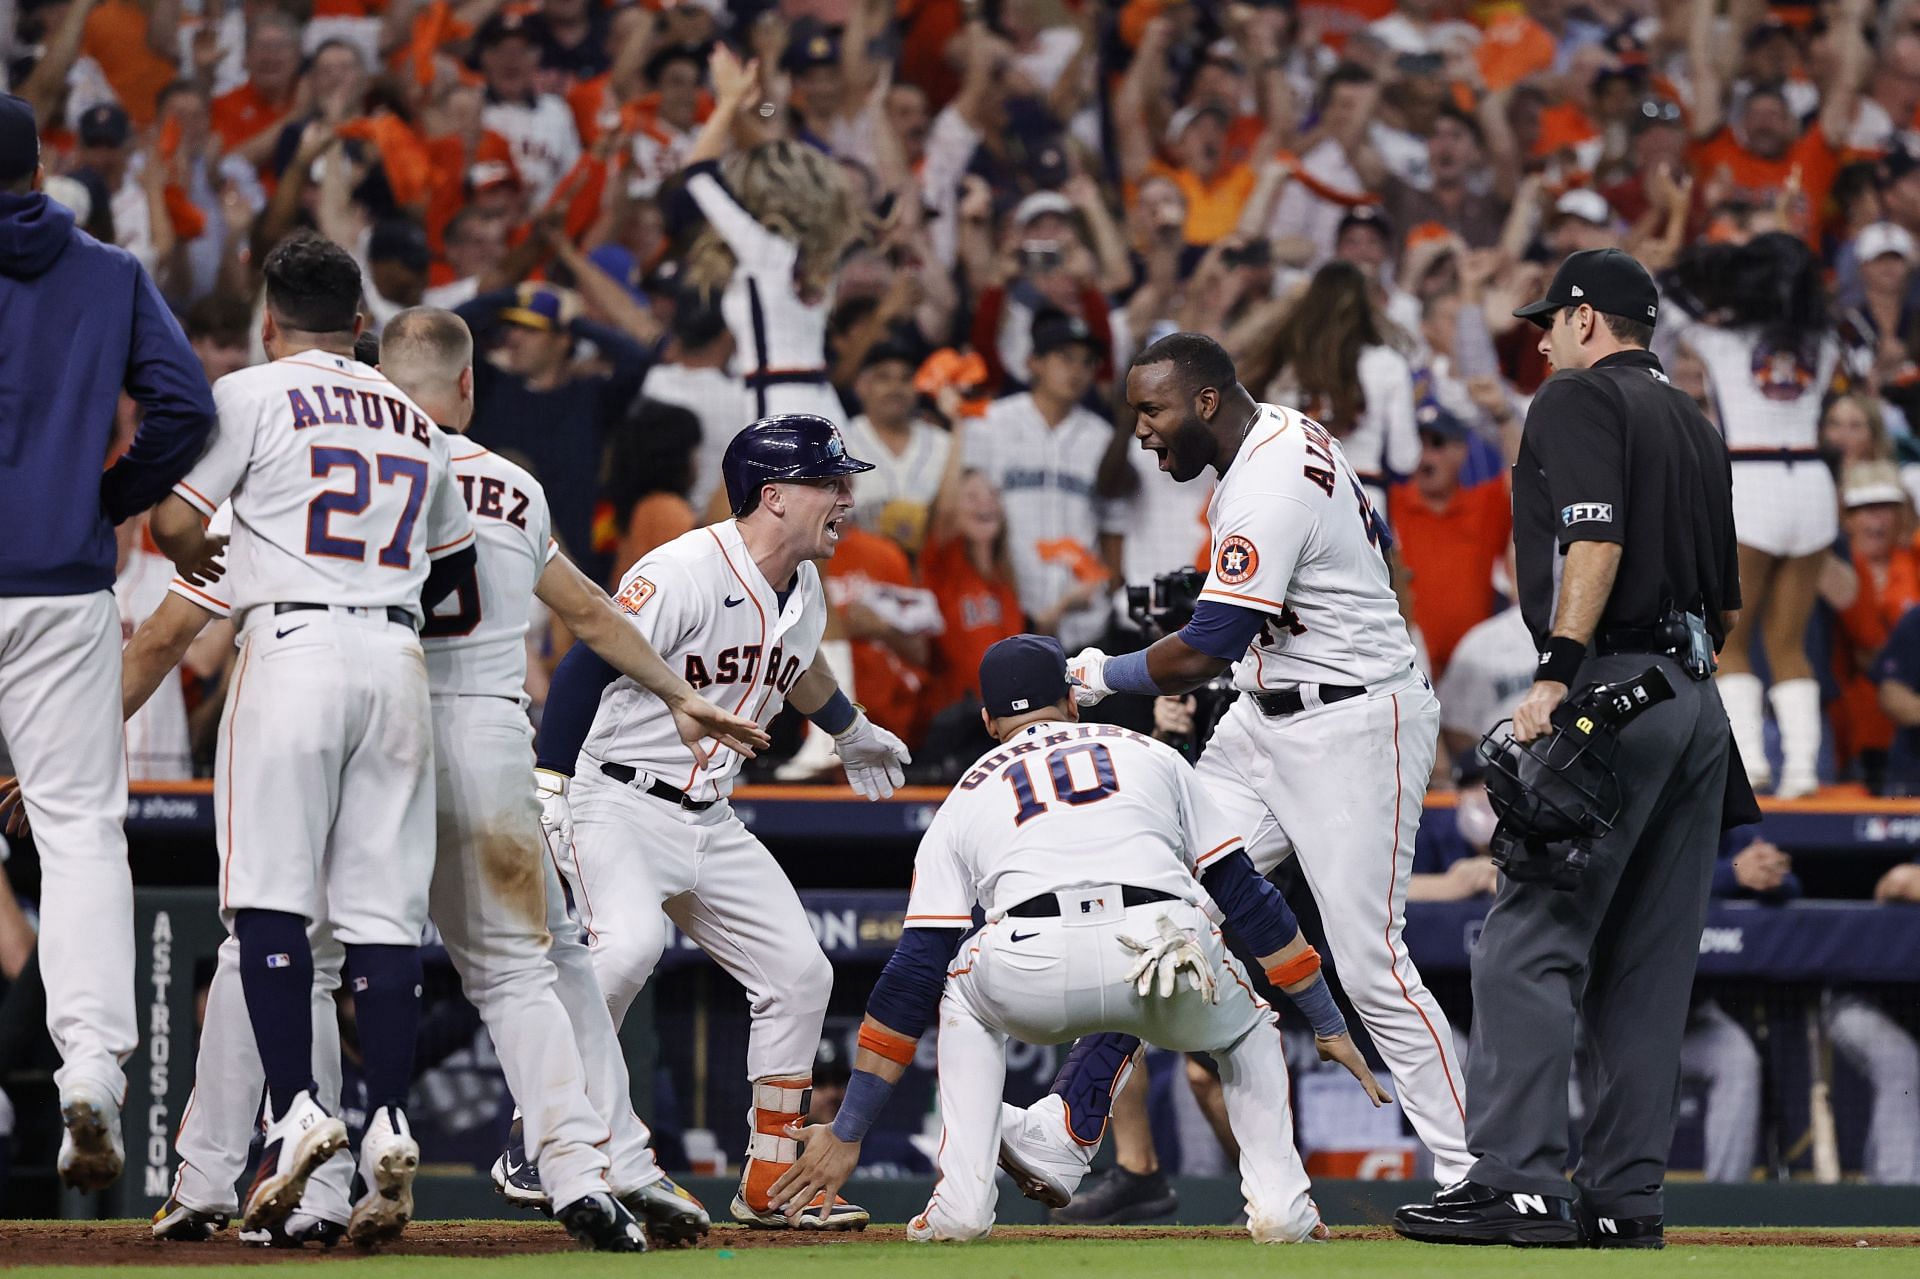 The Astros celebrating their walkoff win against the Mariners.